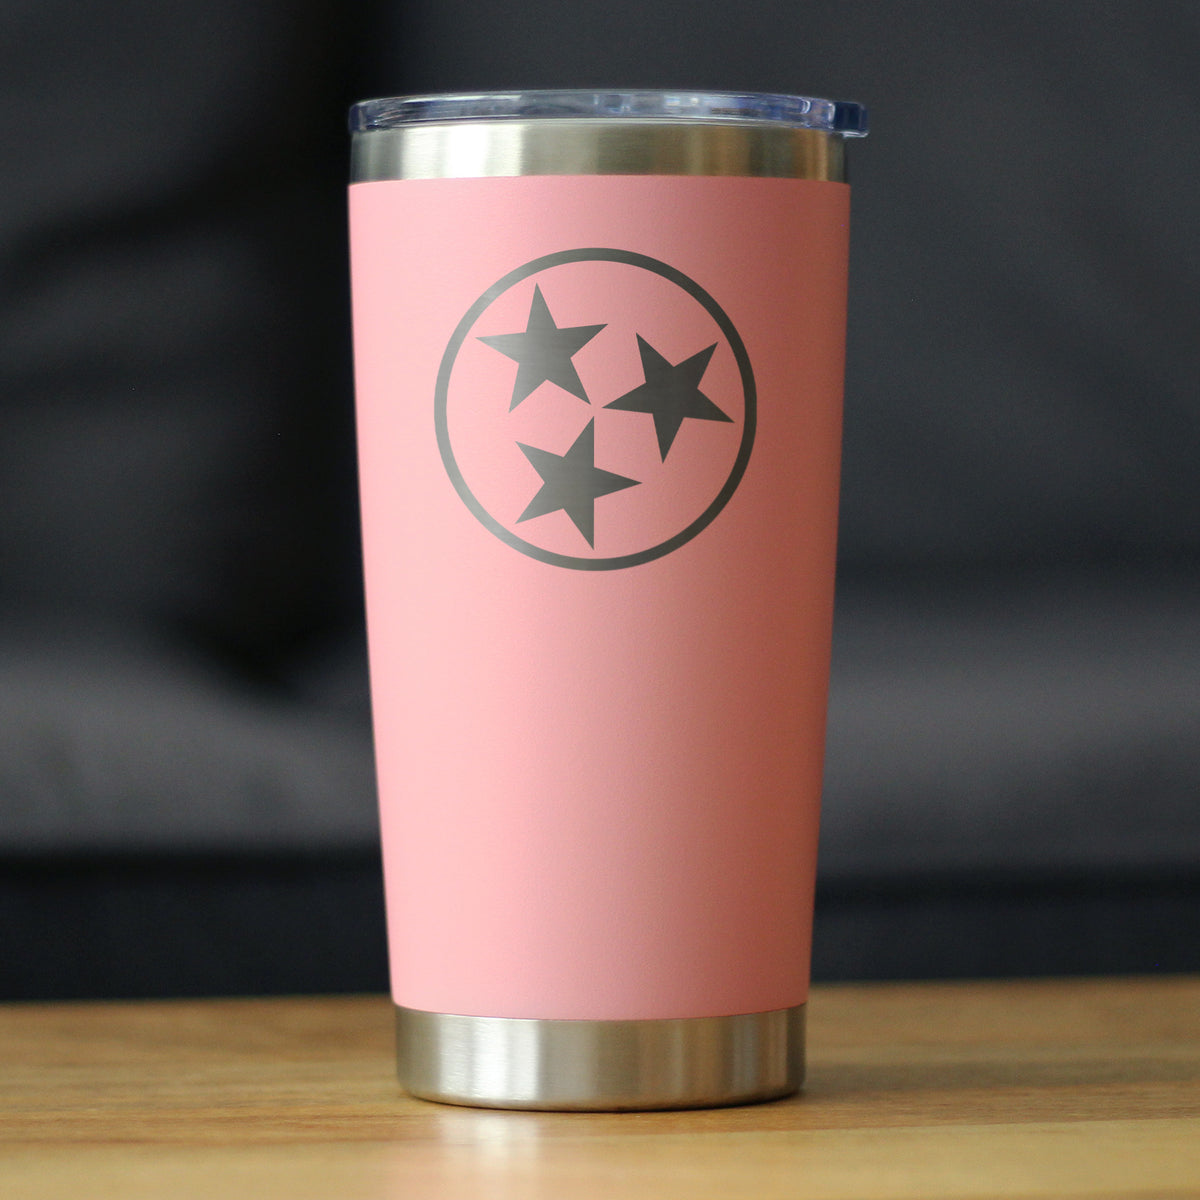 Flag of Tennessee - Insulated Coffee Tumbler Cup with Sliding Lid - Stainless Steel Insulated Mug - Tennessee Gifts for Women and Men Tennesseans